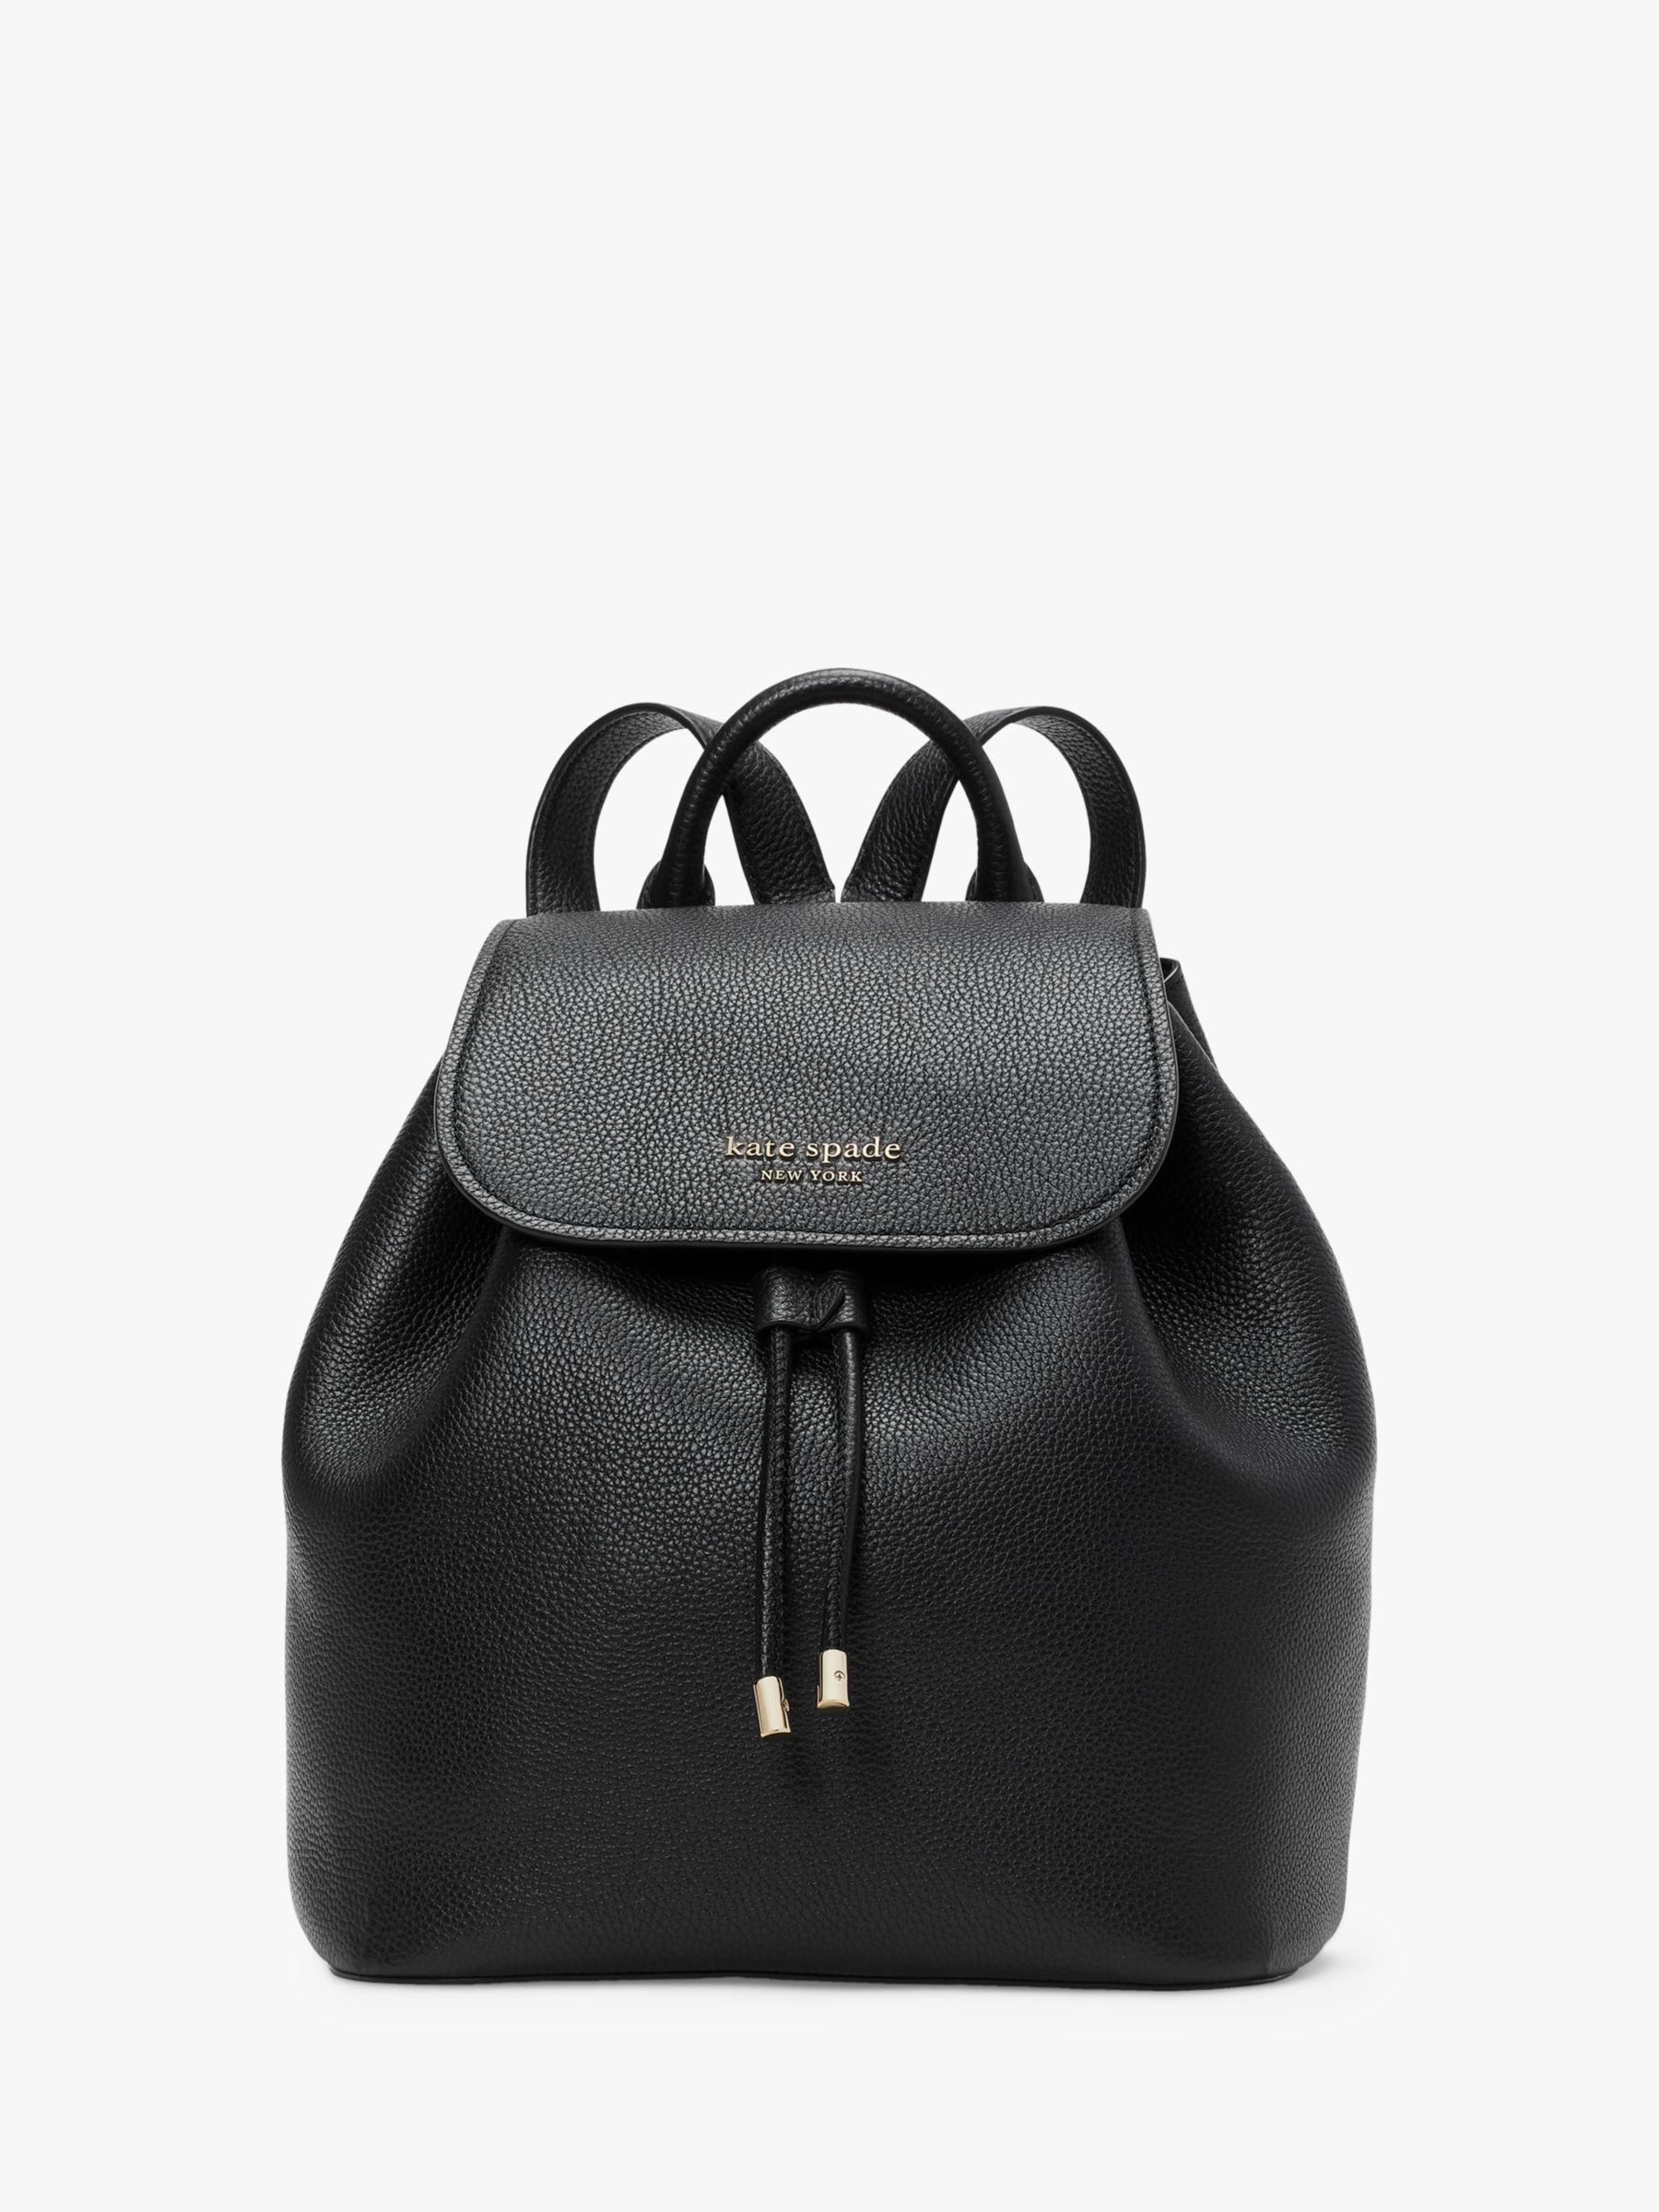 kate spade new york Sinch Medium Leather Flap Over Backpack